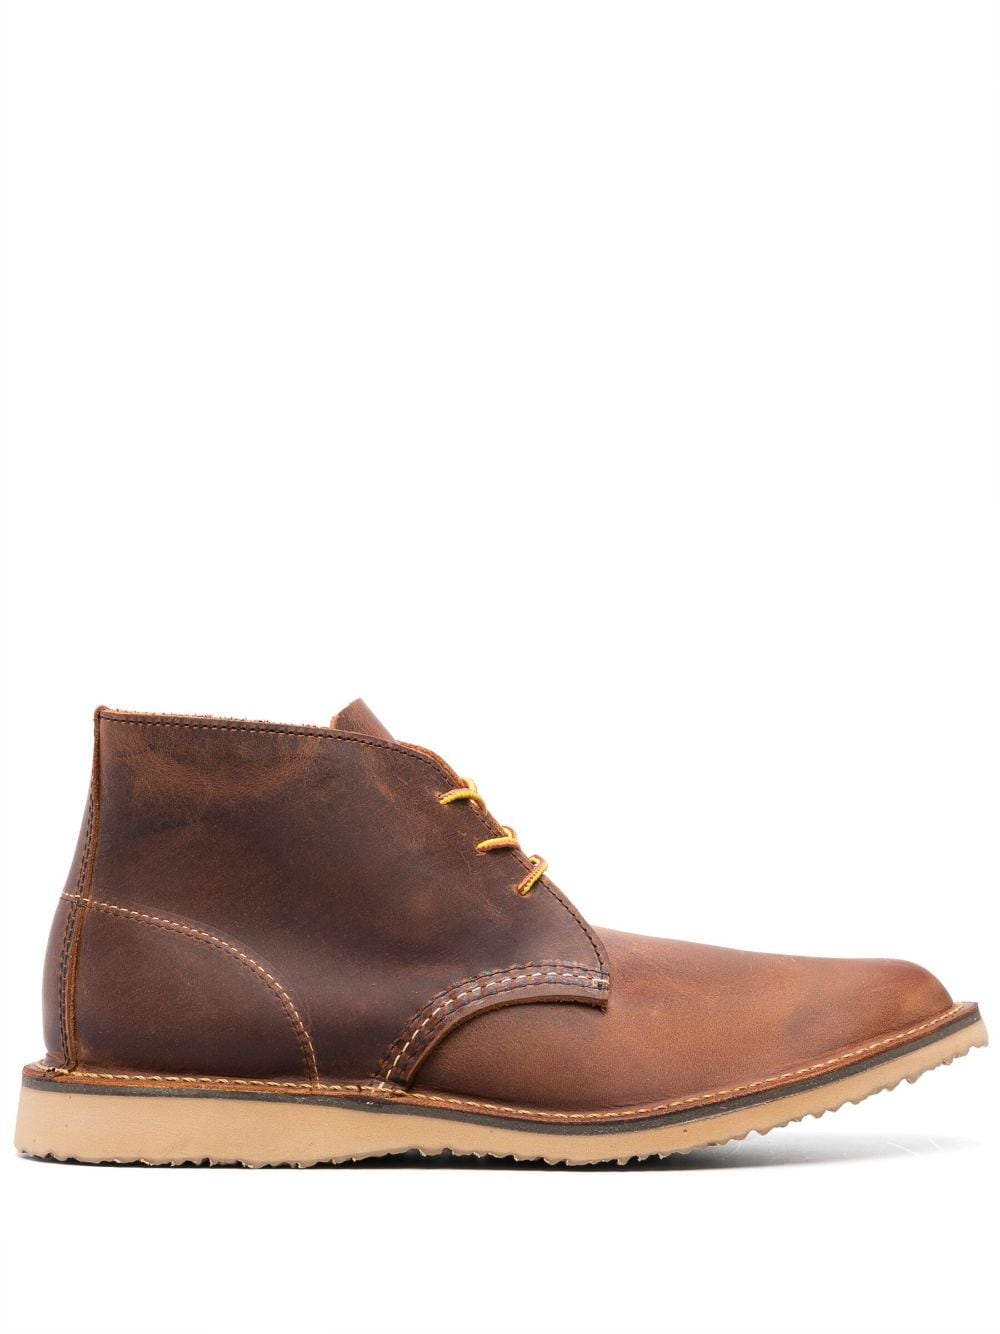 Red Wing Shoes Weekender Chukka Stiefeletten - Braun von Red Wing Shoes